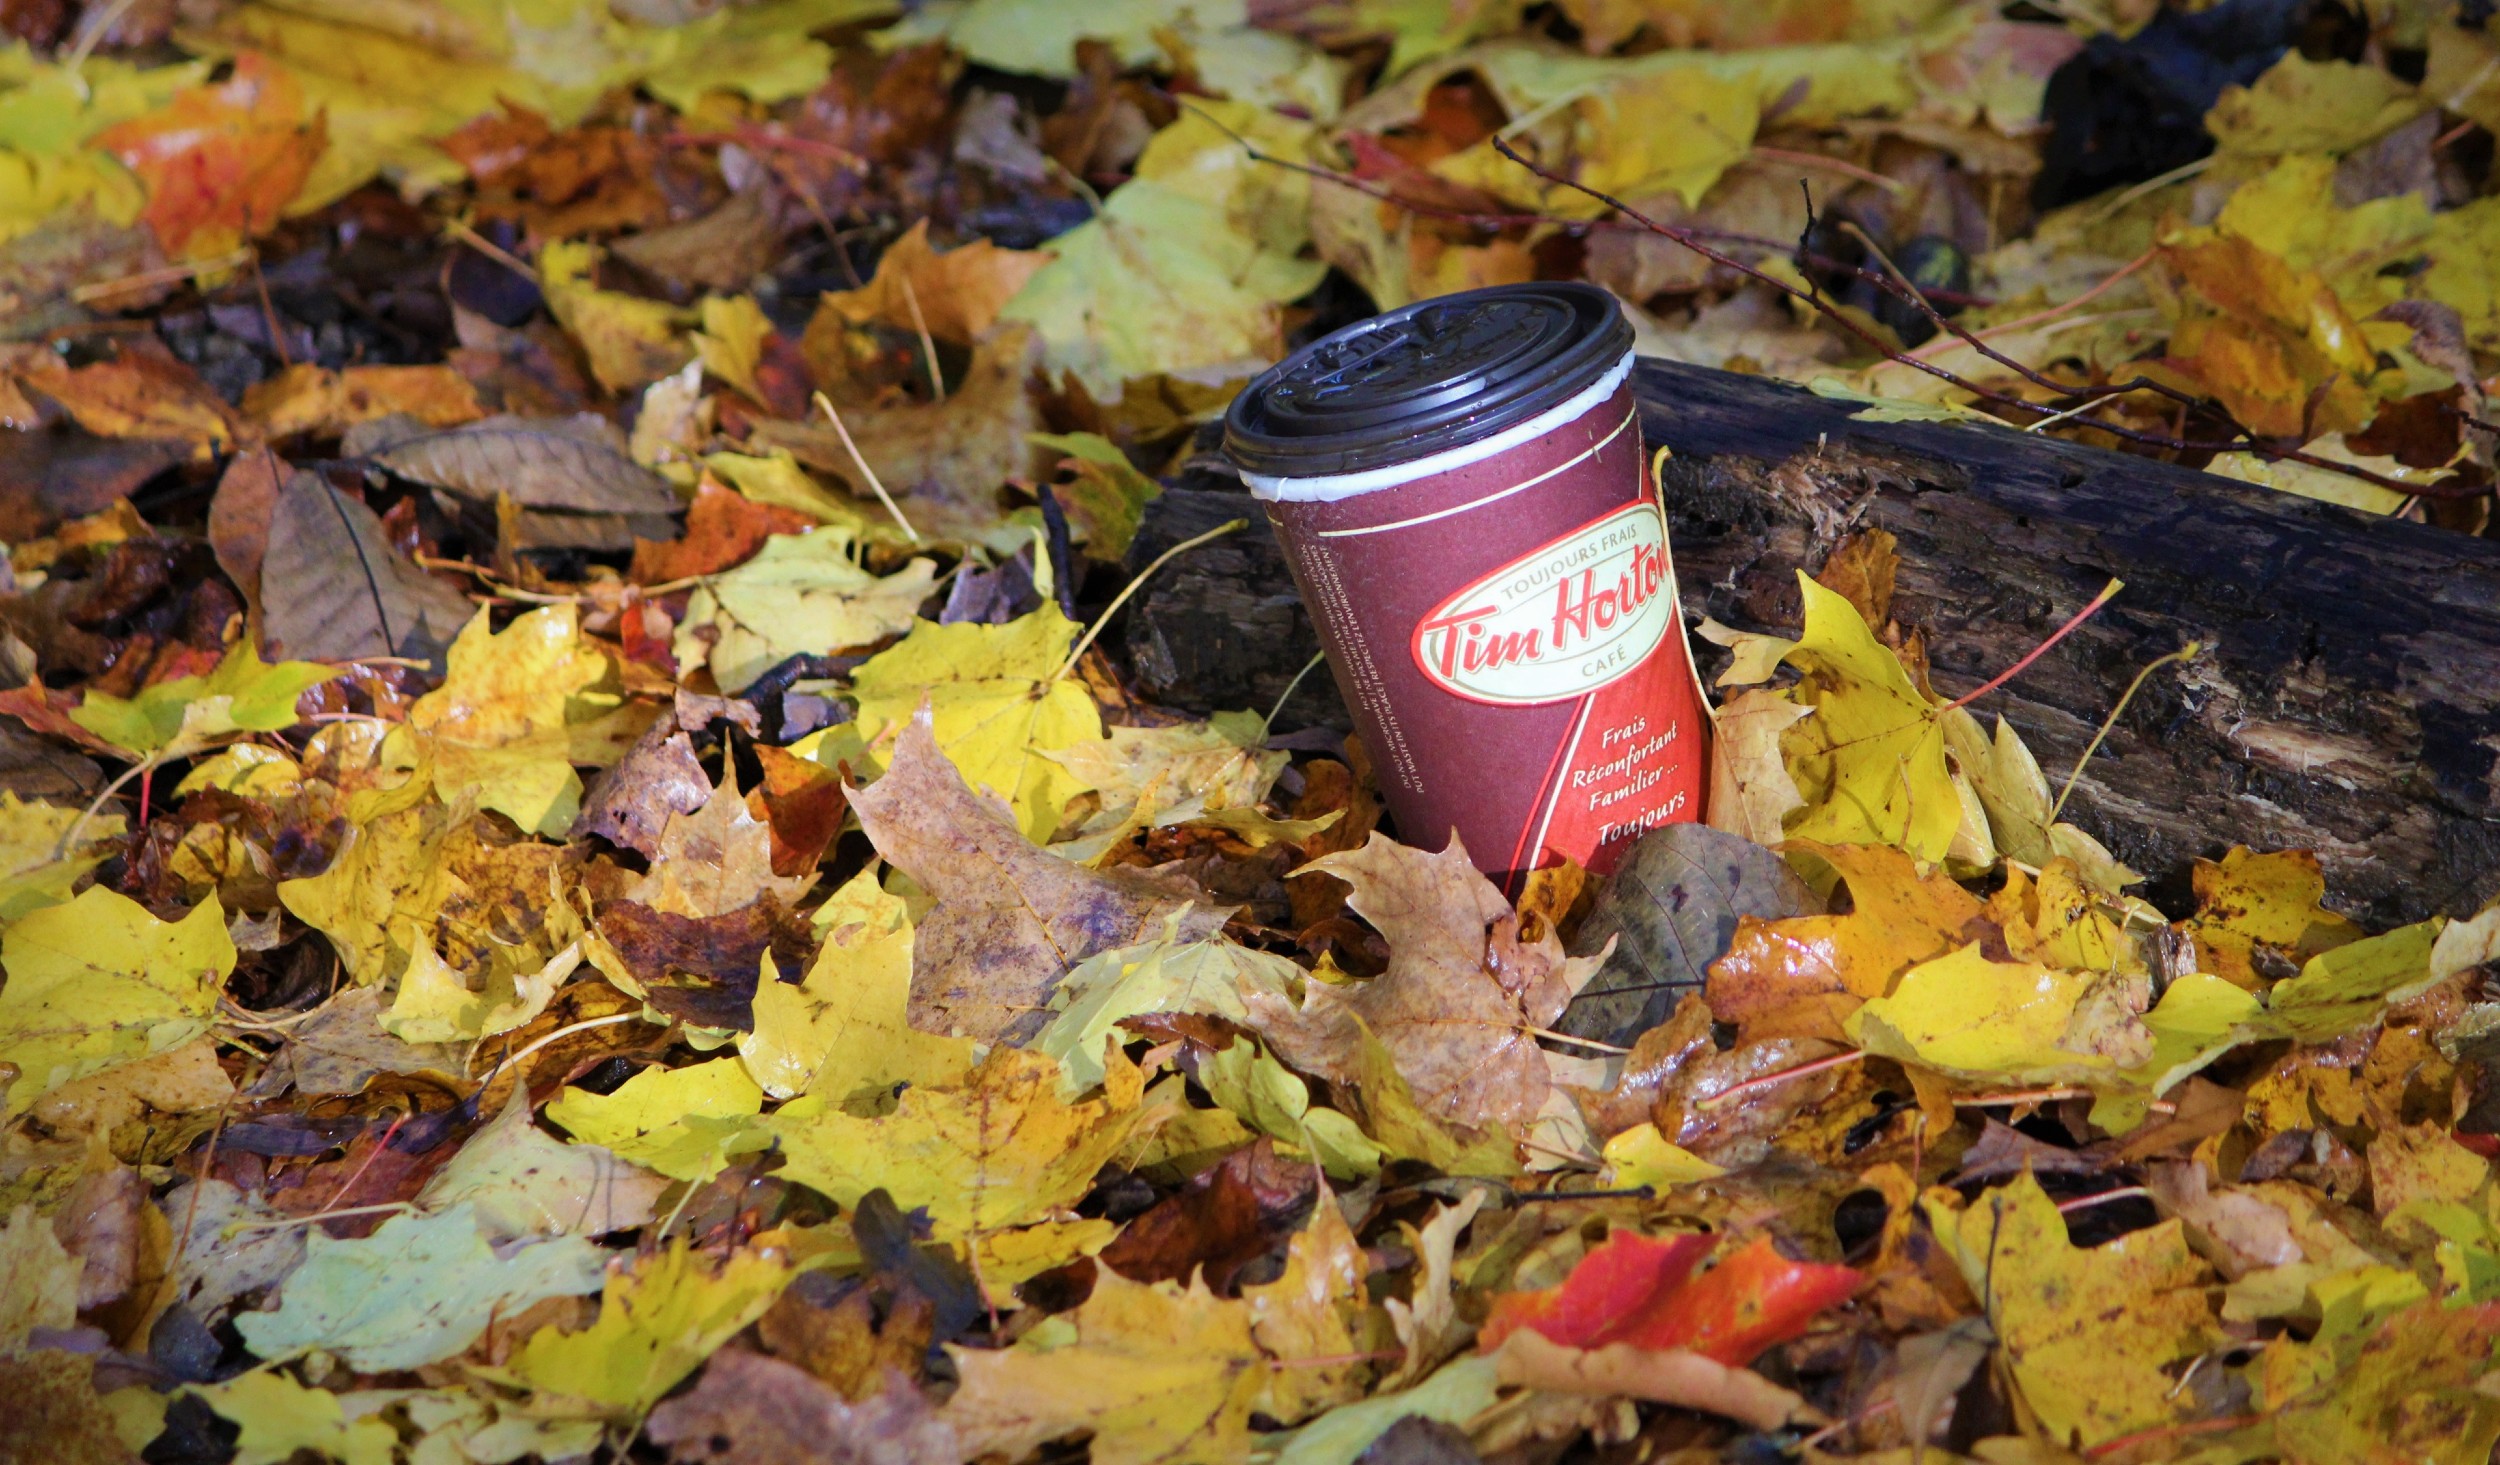 A Tim Horton's coffee cup on a bed of leaves.